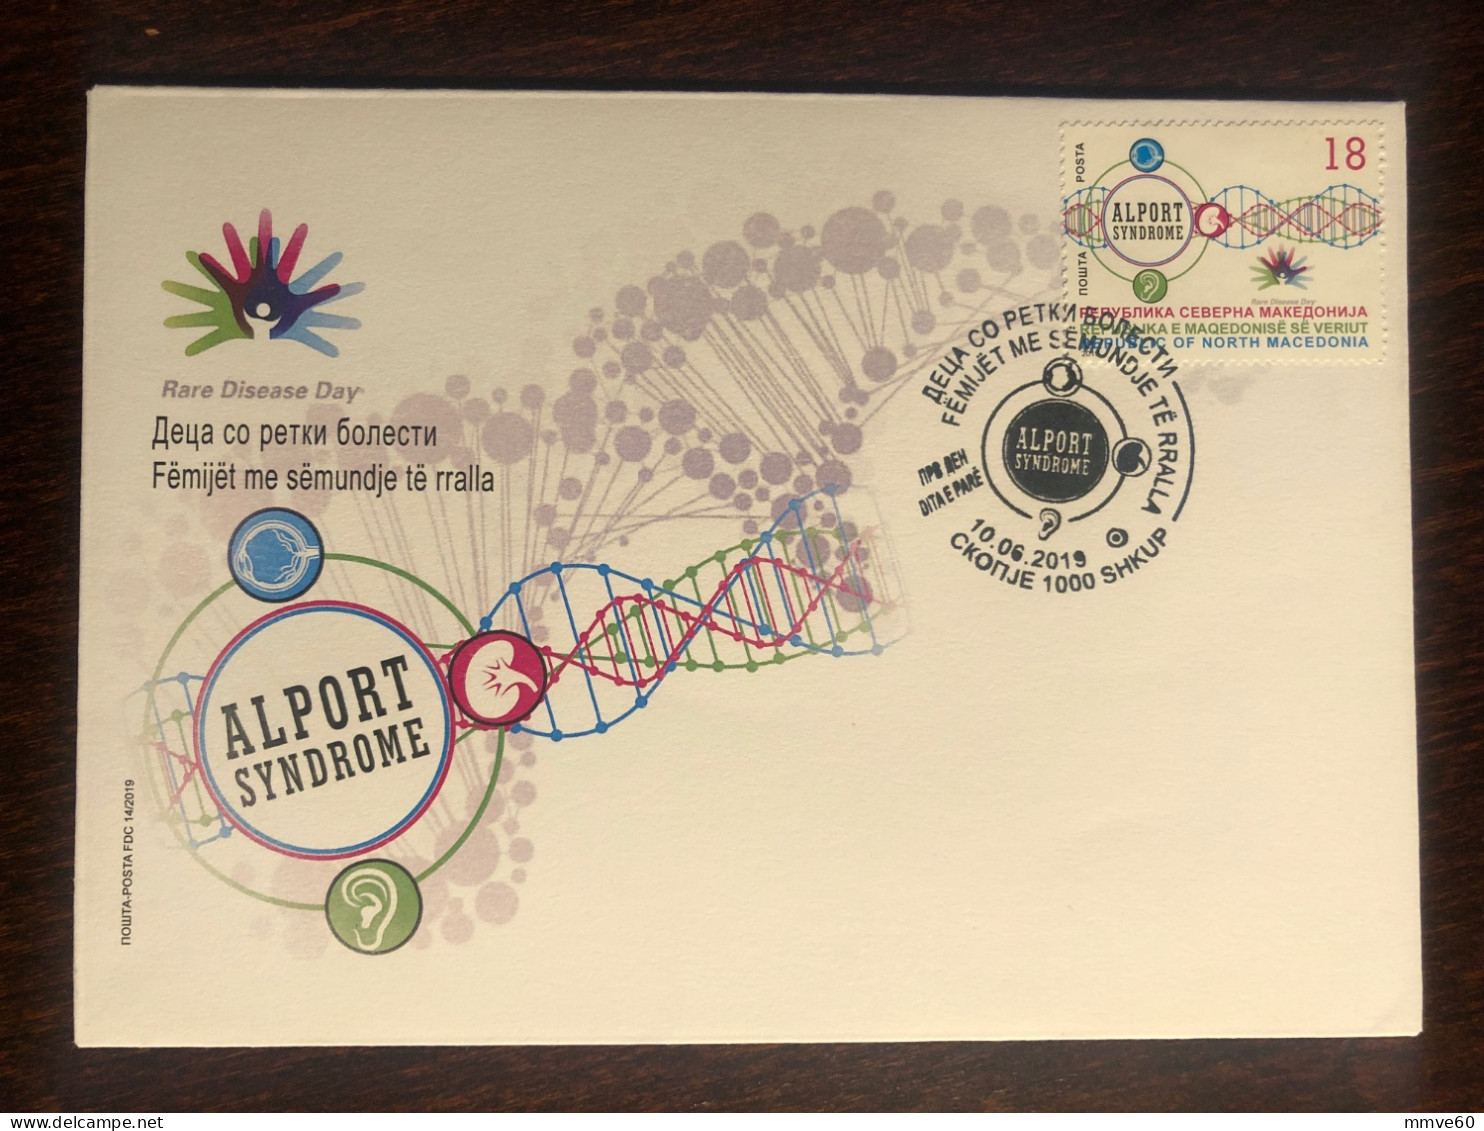 MACEDONIA FDC COVER 2019 YEAR CHILDREN RARE DISEASES - ALPORT SYNDROME HEALTH MEDICINE STAMPS - Macédoine Du Nord